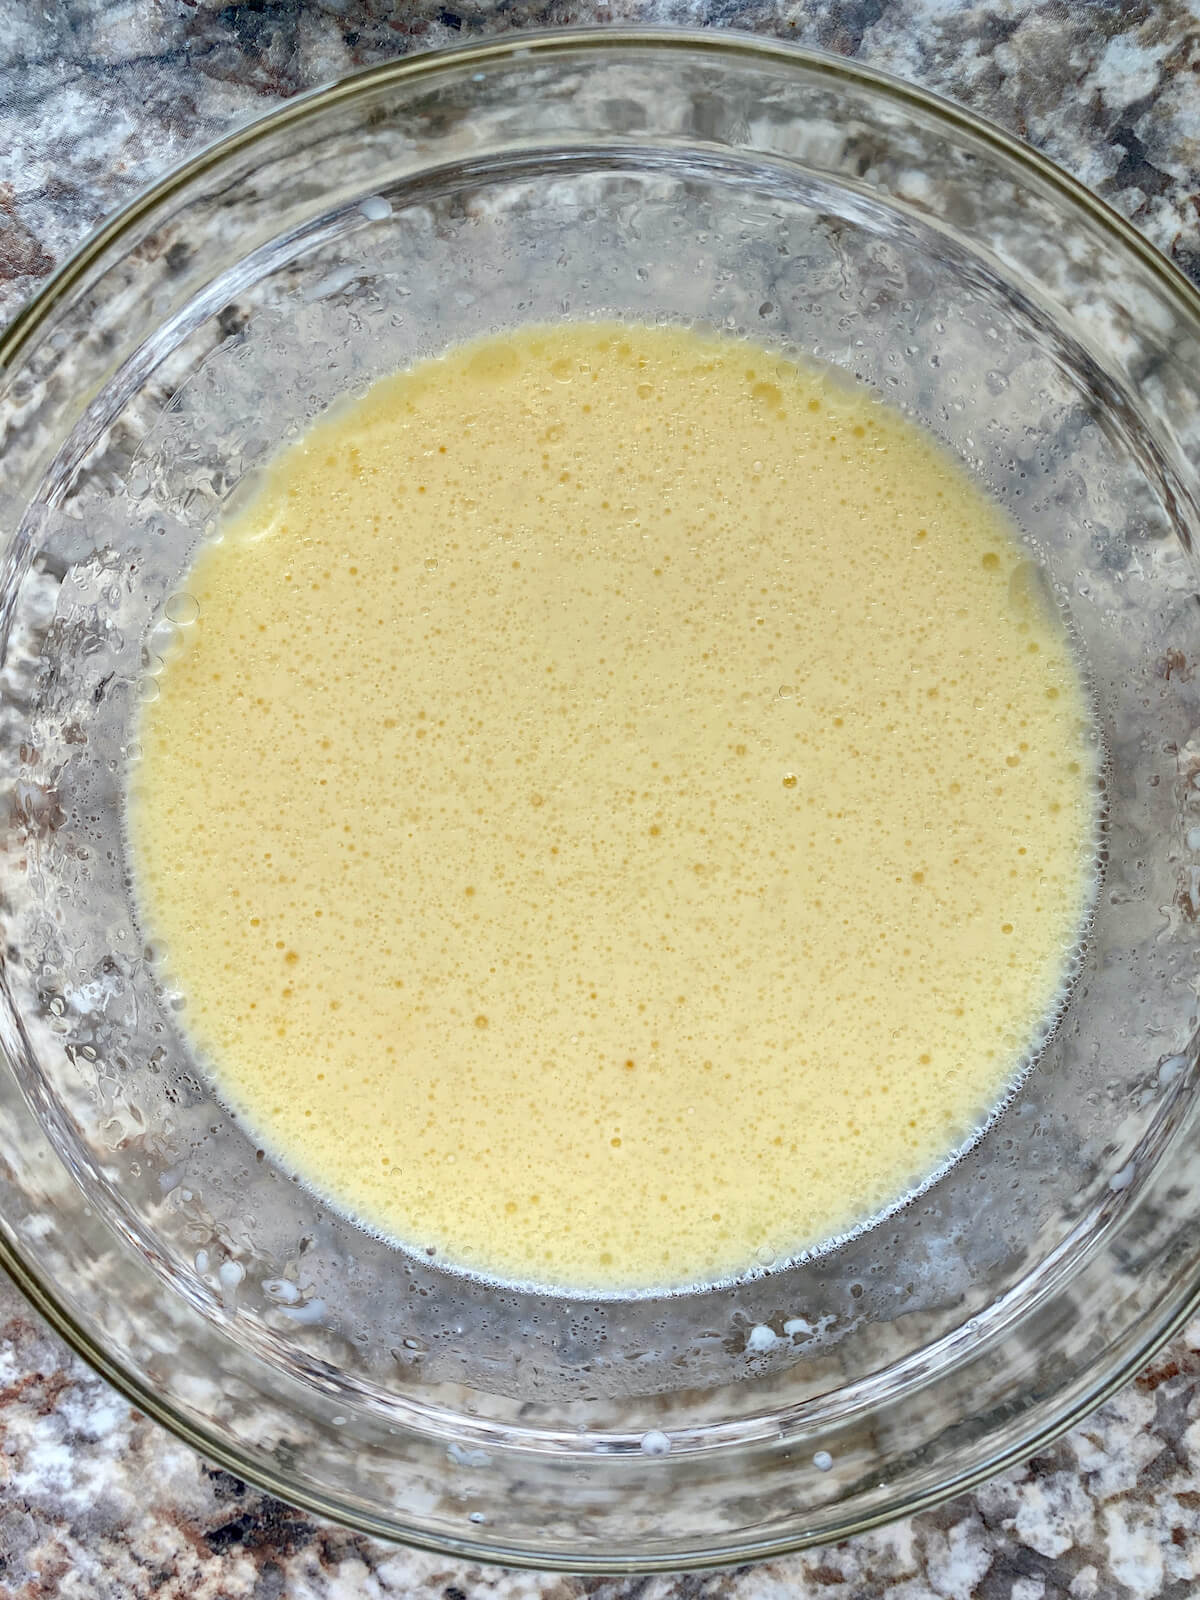 A glass bowl filled with a mix of buttermilk, eggs, vanilla extract, and canola oil.